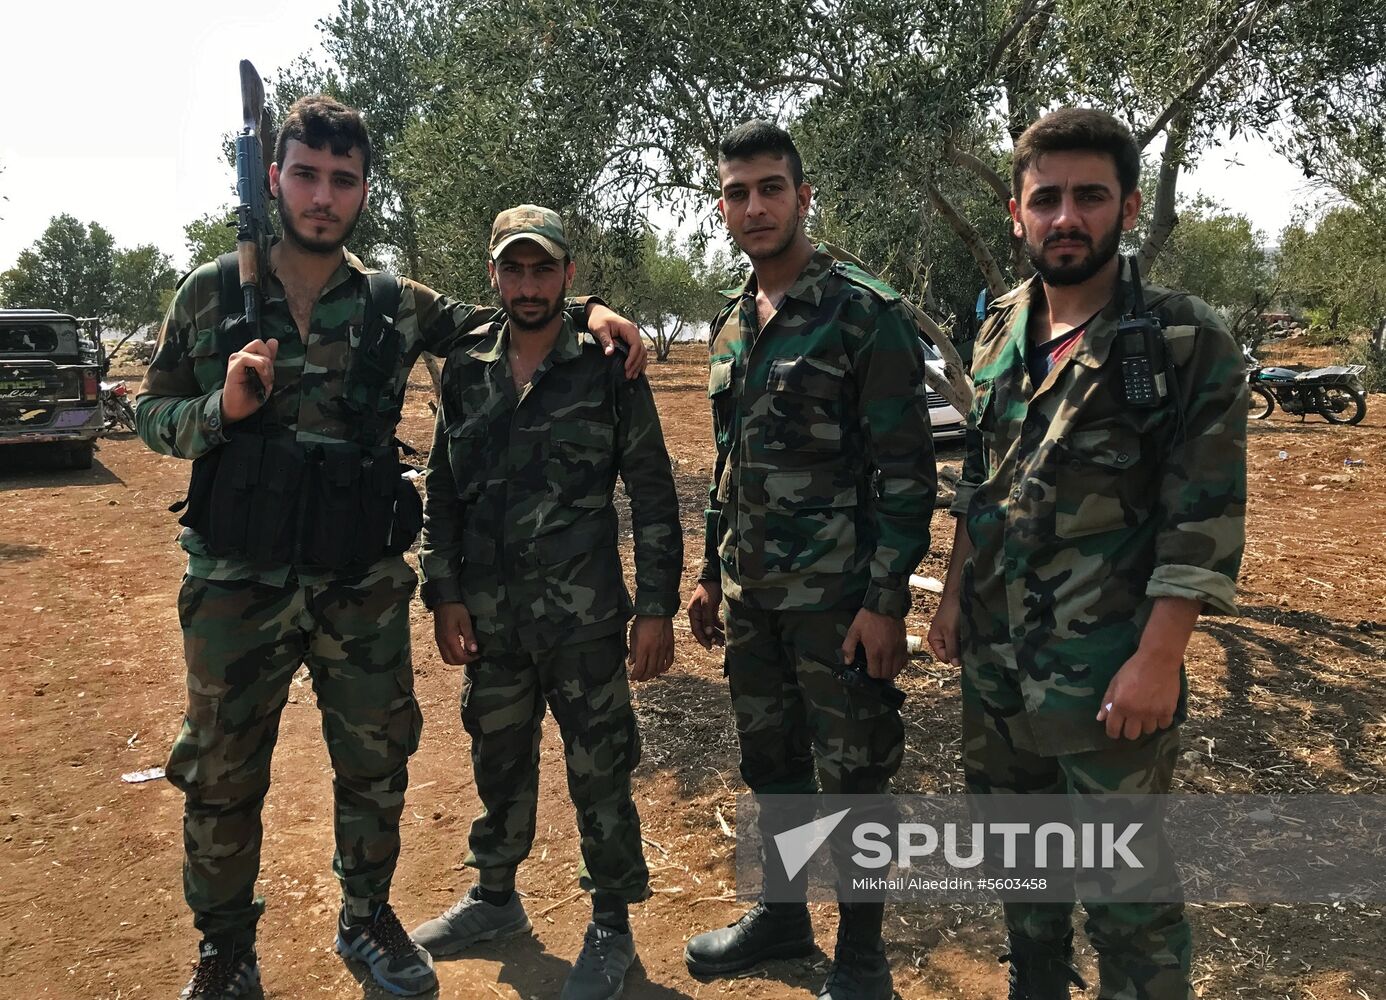 Syrian Army liberated Daraa Province